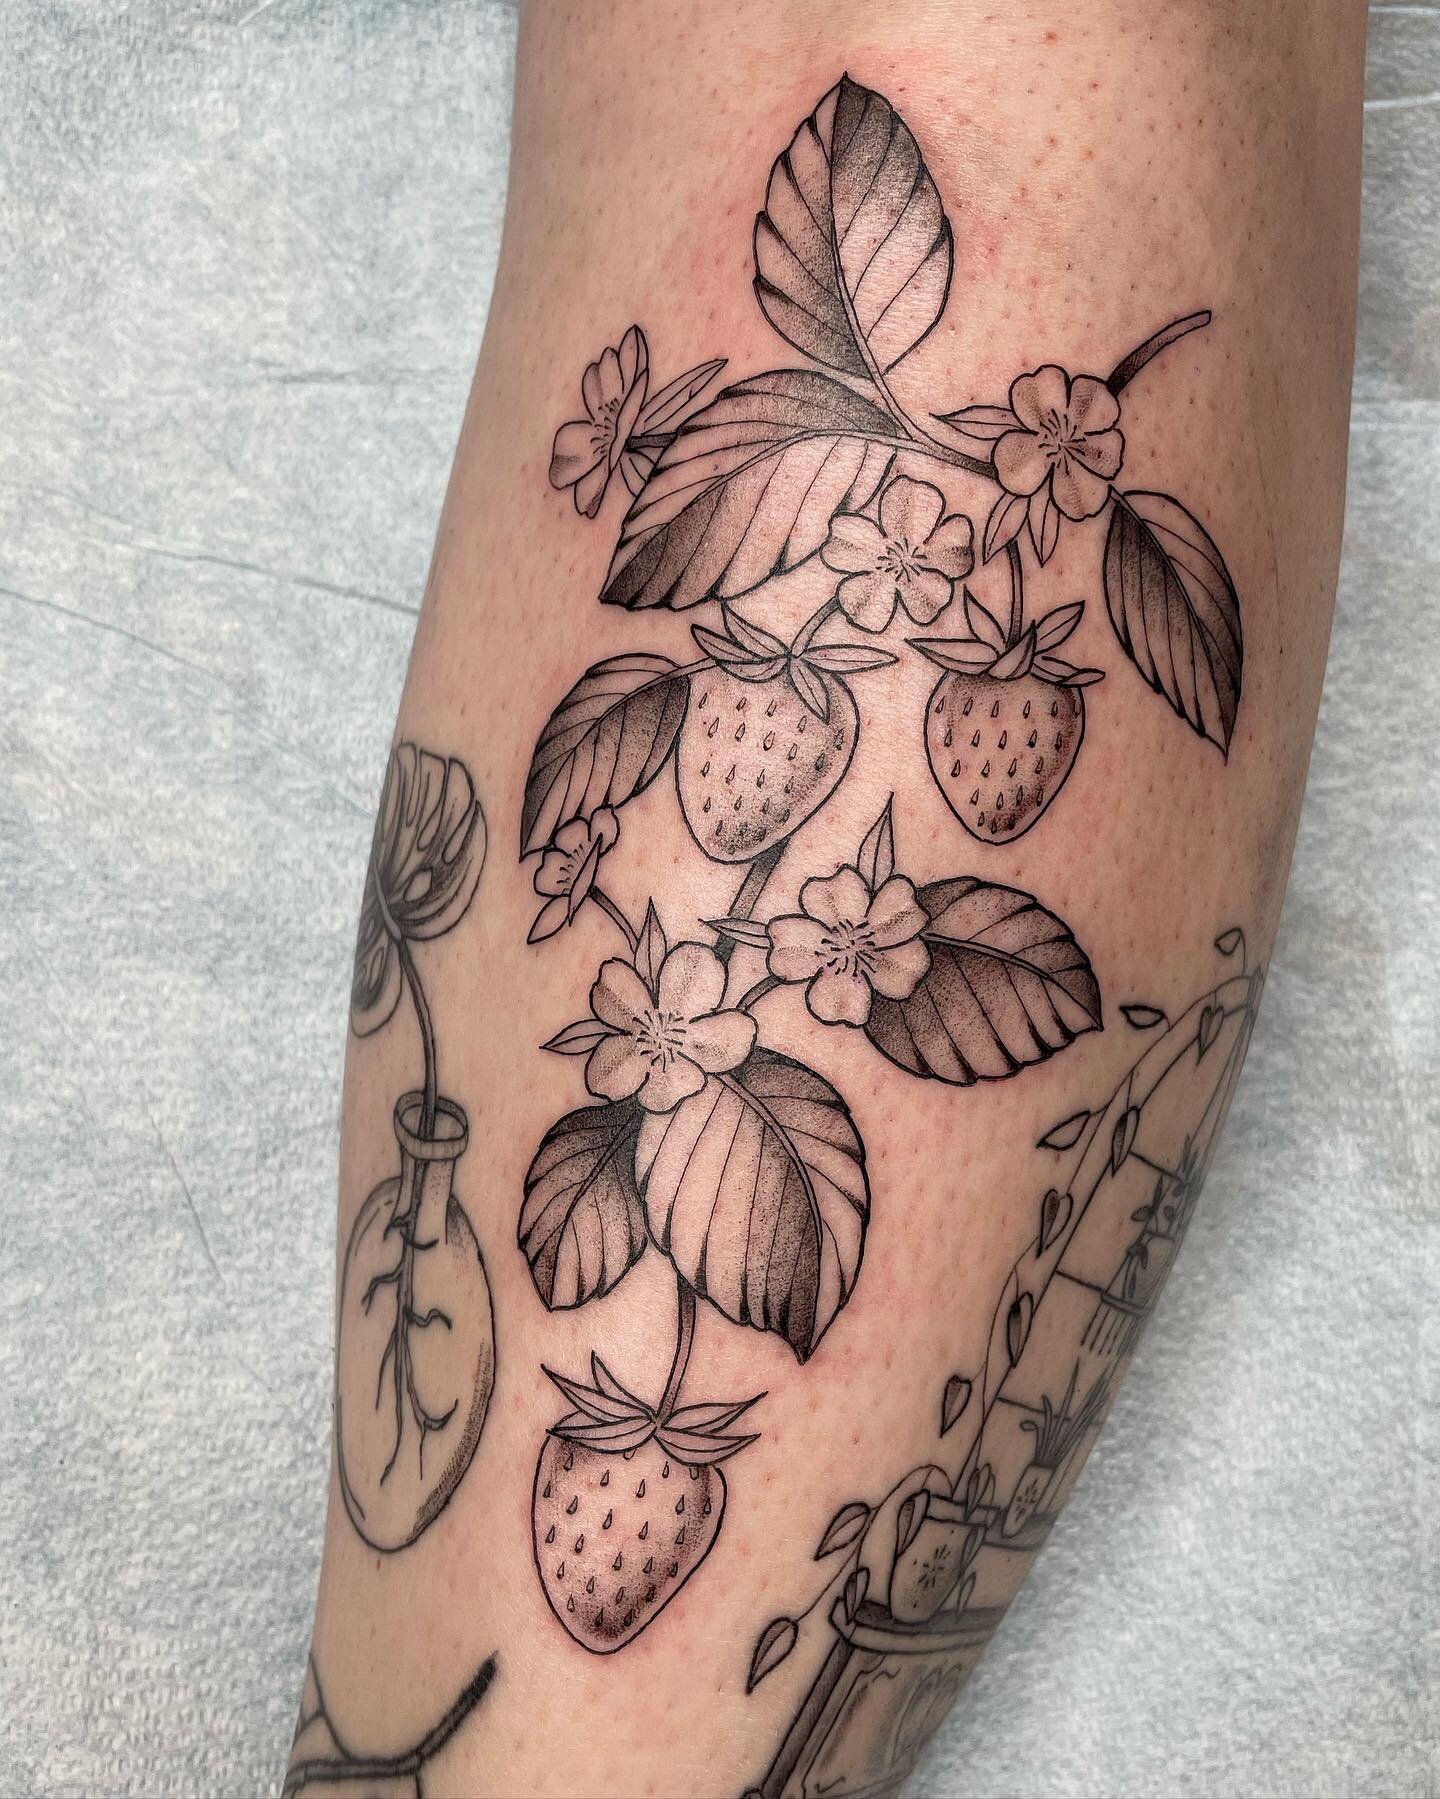 been such a fun week working with so many regulars 🥲 here&rsquo;s some strawberries tucked in for Kaylie 🍓 next to a healed window and a healed garlic on her calf :) thank you appreciate you! 
.
.
.
.
.
.
.
.
#eugenetattoo #eugeneoregon #eugene #or